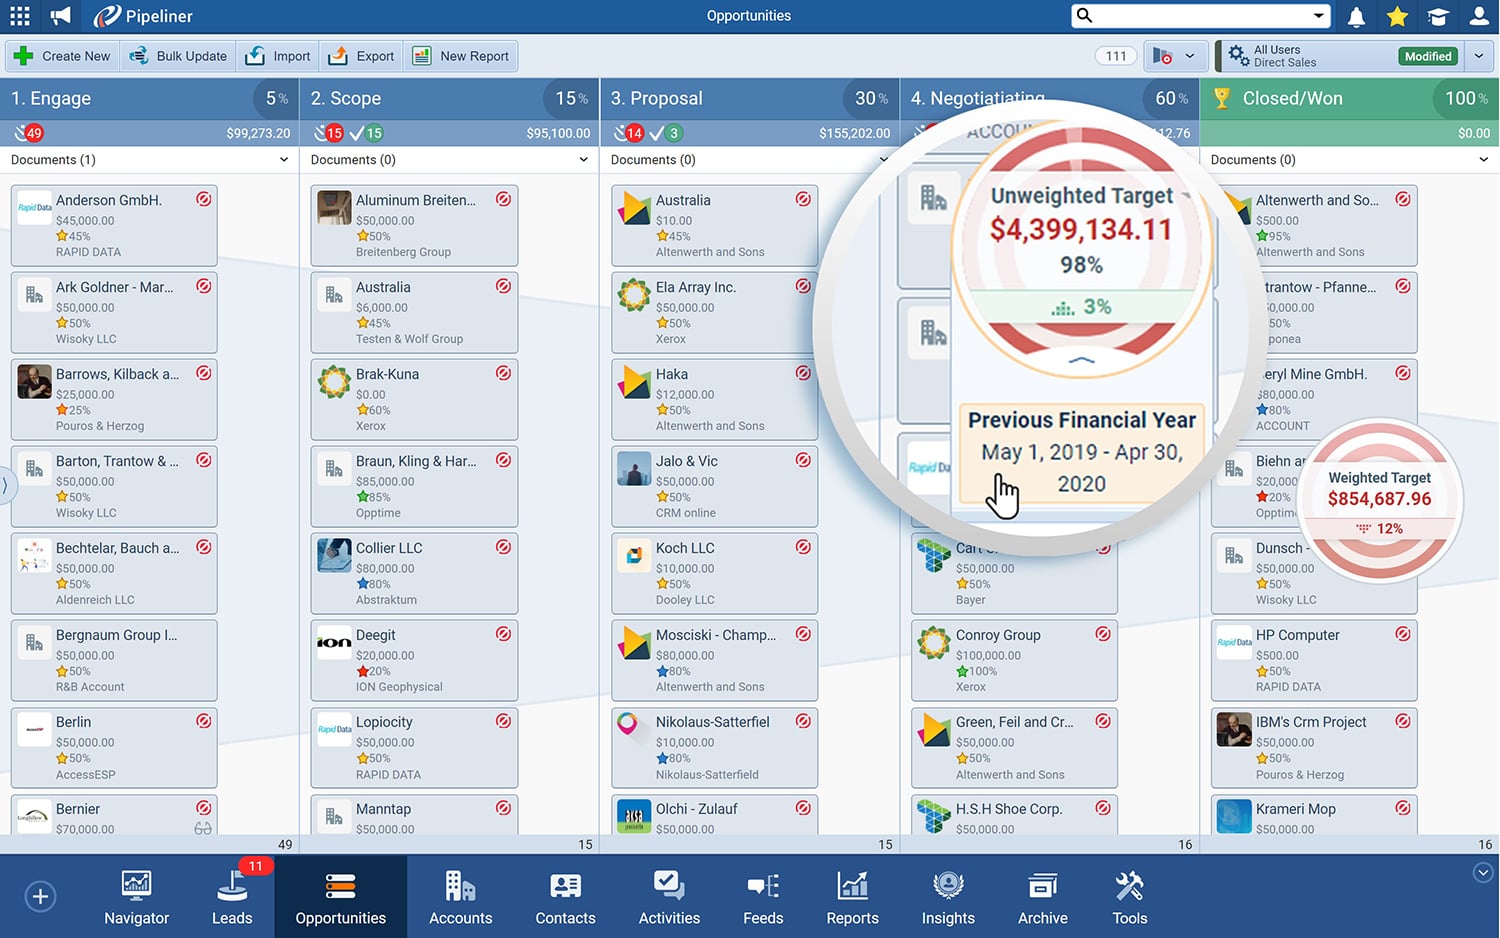 primary lagging indicators are targets seen in Pipeliner CRM